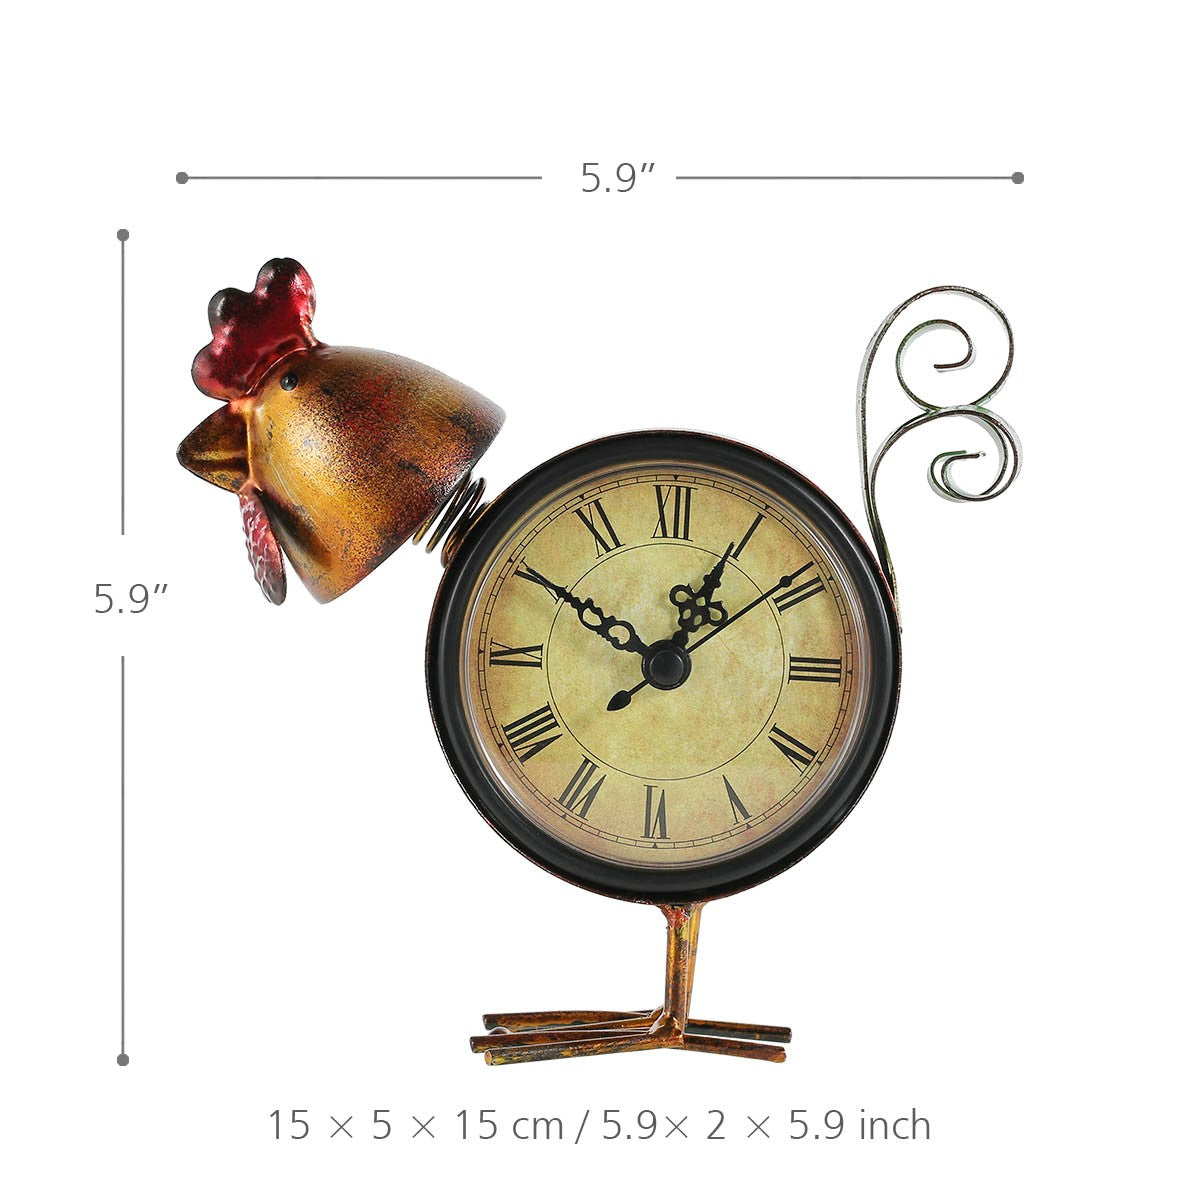 Christmas Decorations UK and Homemade Christmas Decorations with Analog Chicken Clock